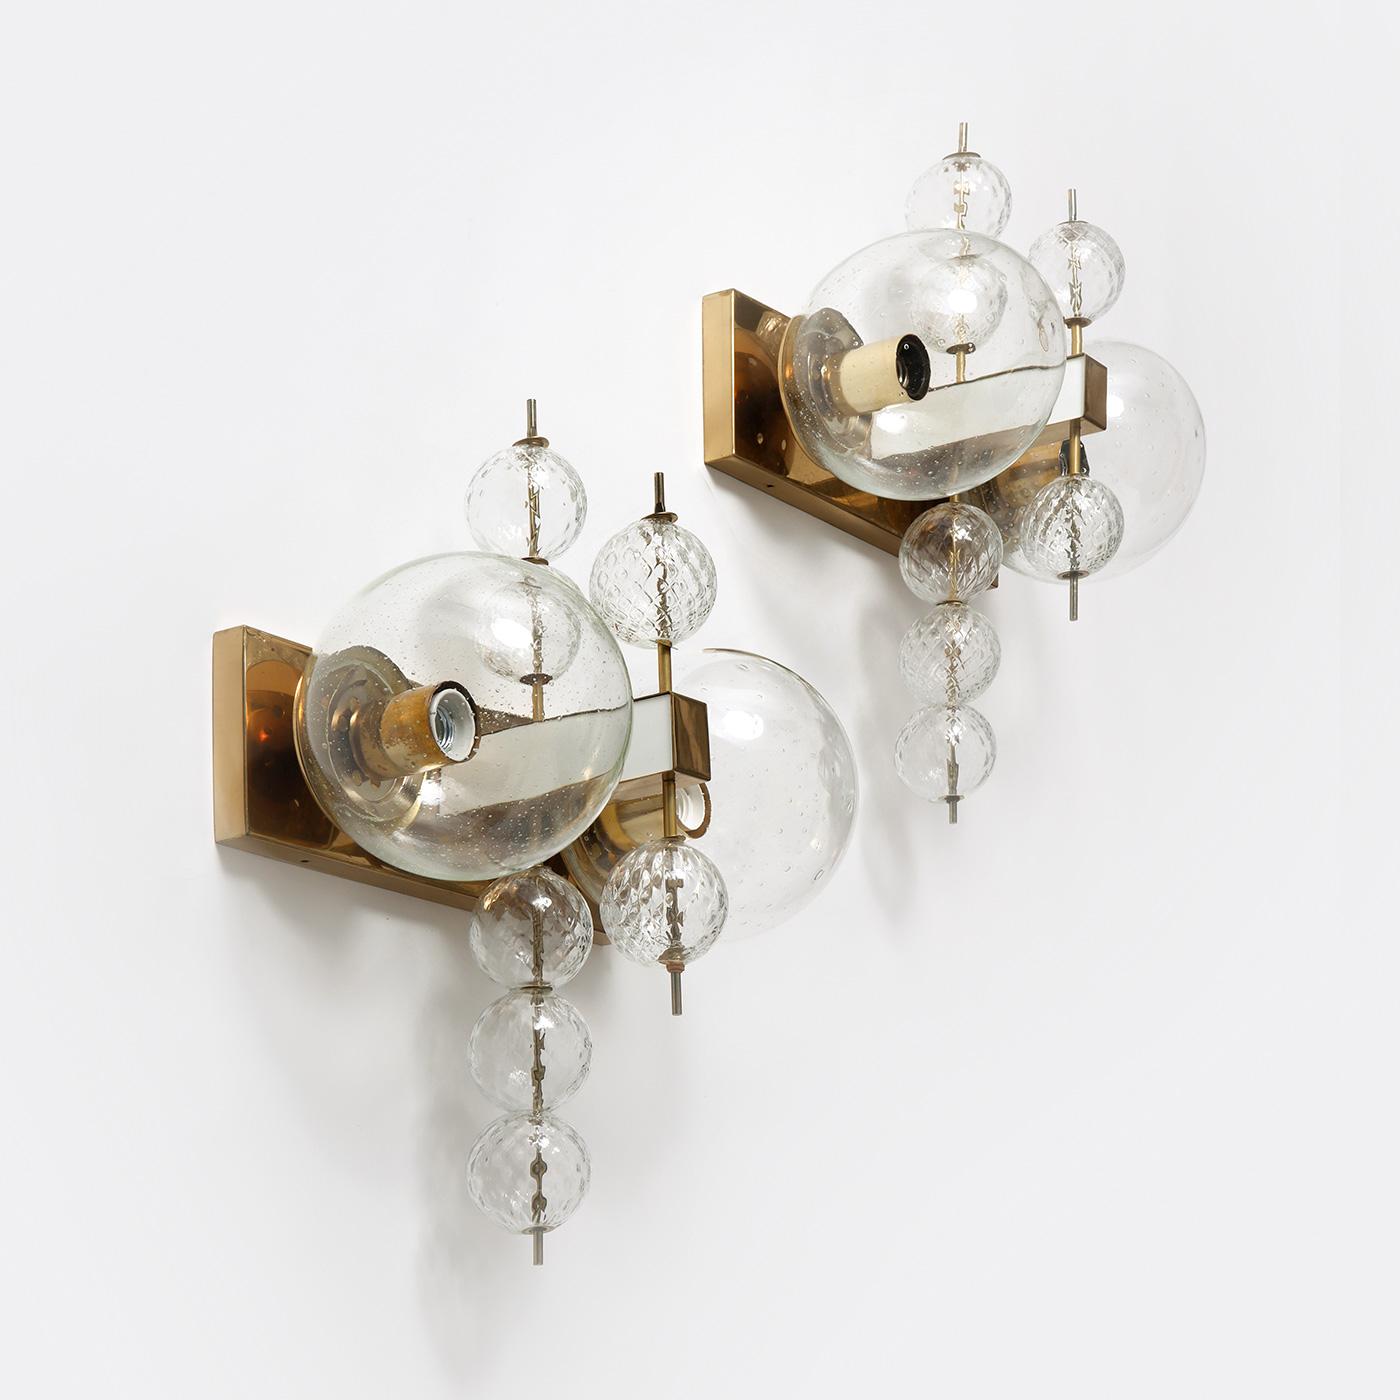 Pair of Sculptural Wall Lamps in Brass and Glass by Kamenický Šenov, 1970s For Sale